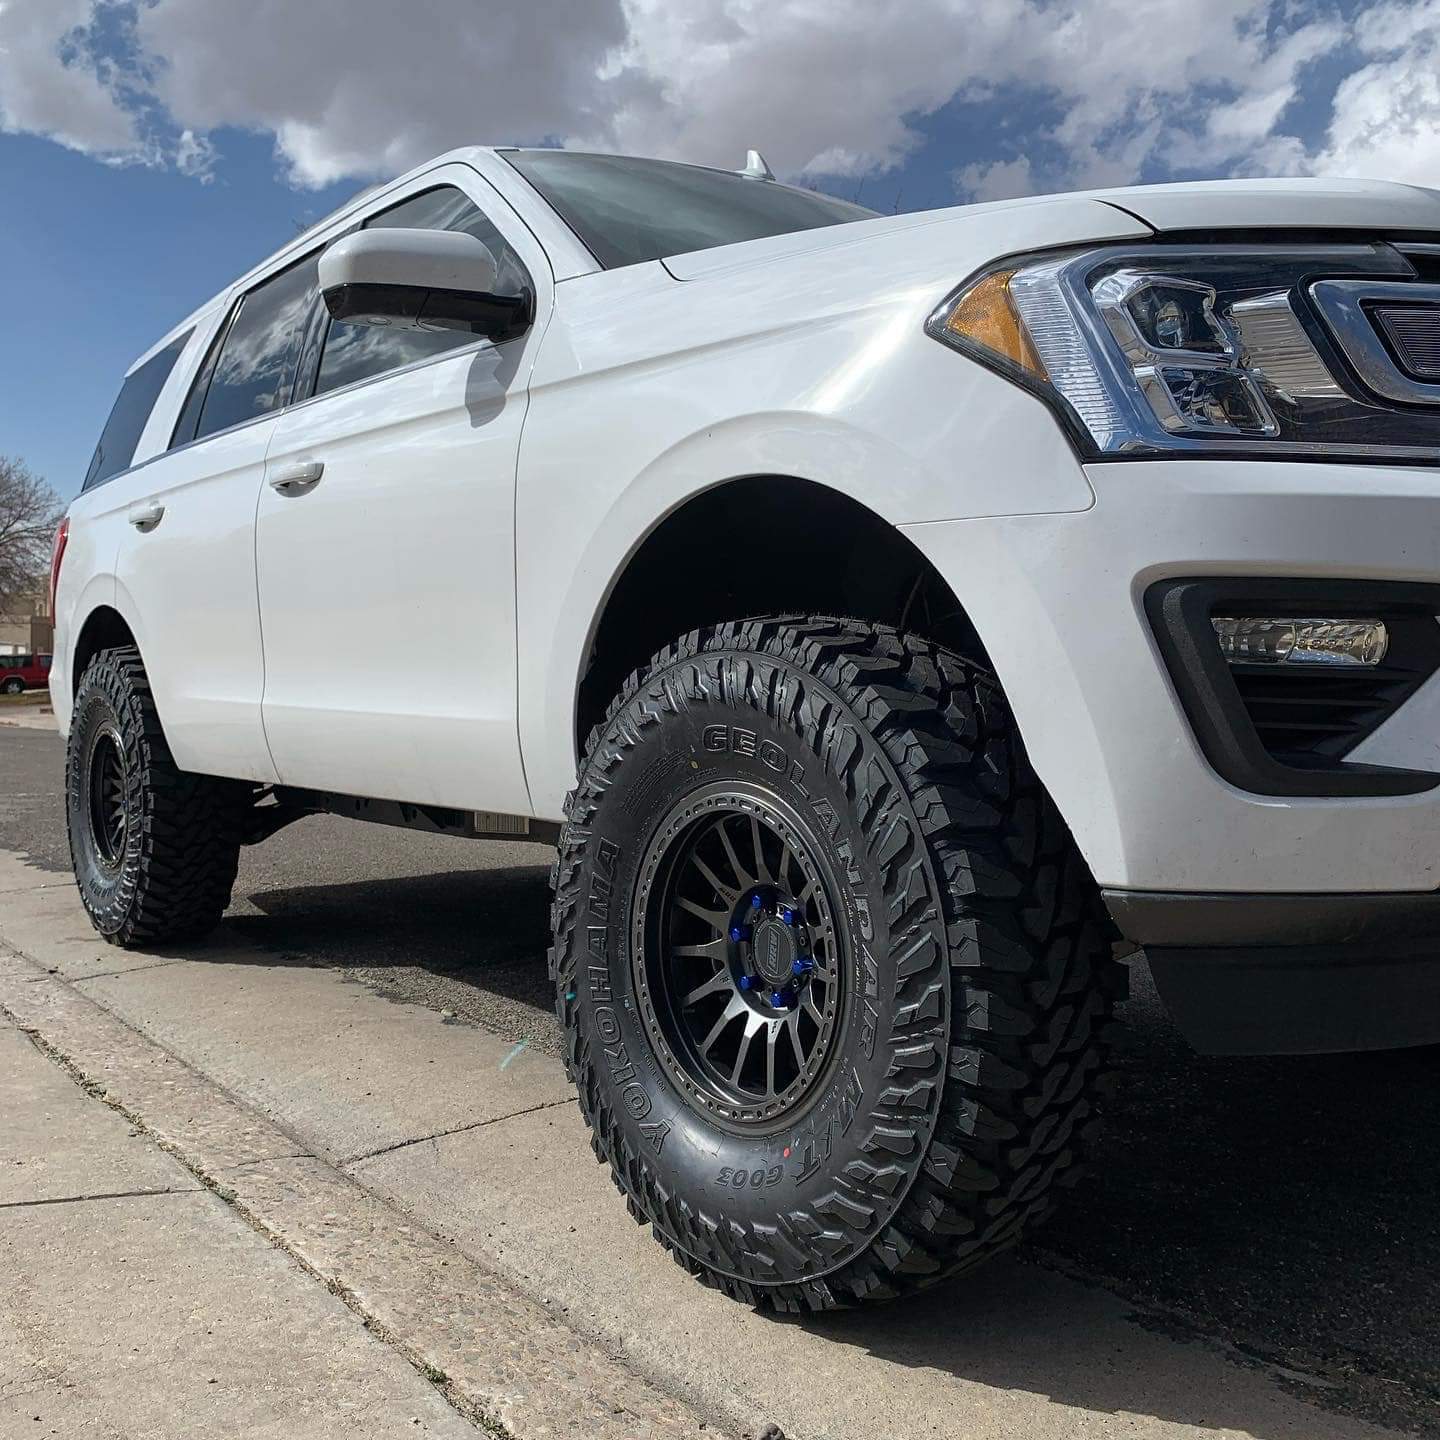 4th Gen Ford Expedition (2018-Present) → Gen 2 Raptor Coil Over Conversion Buckets